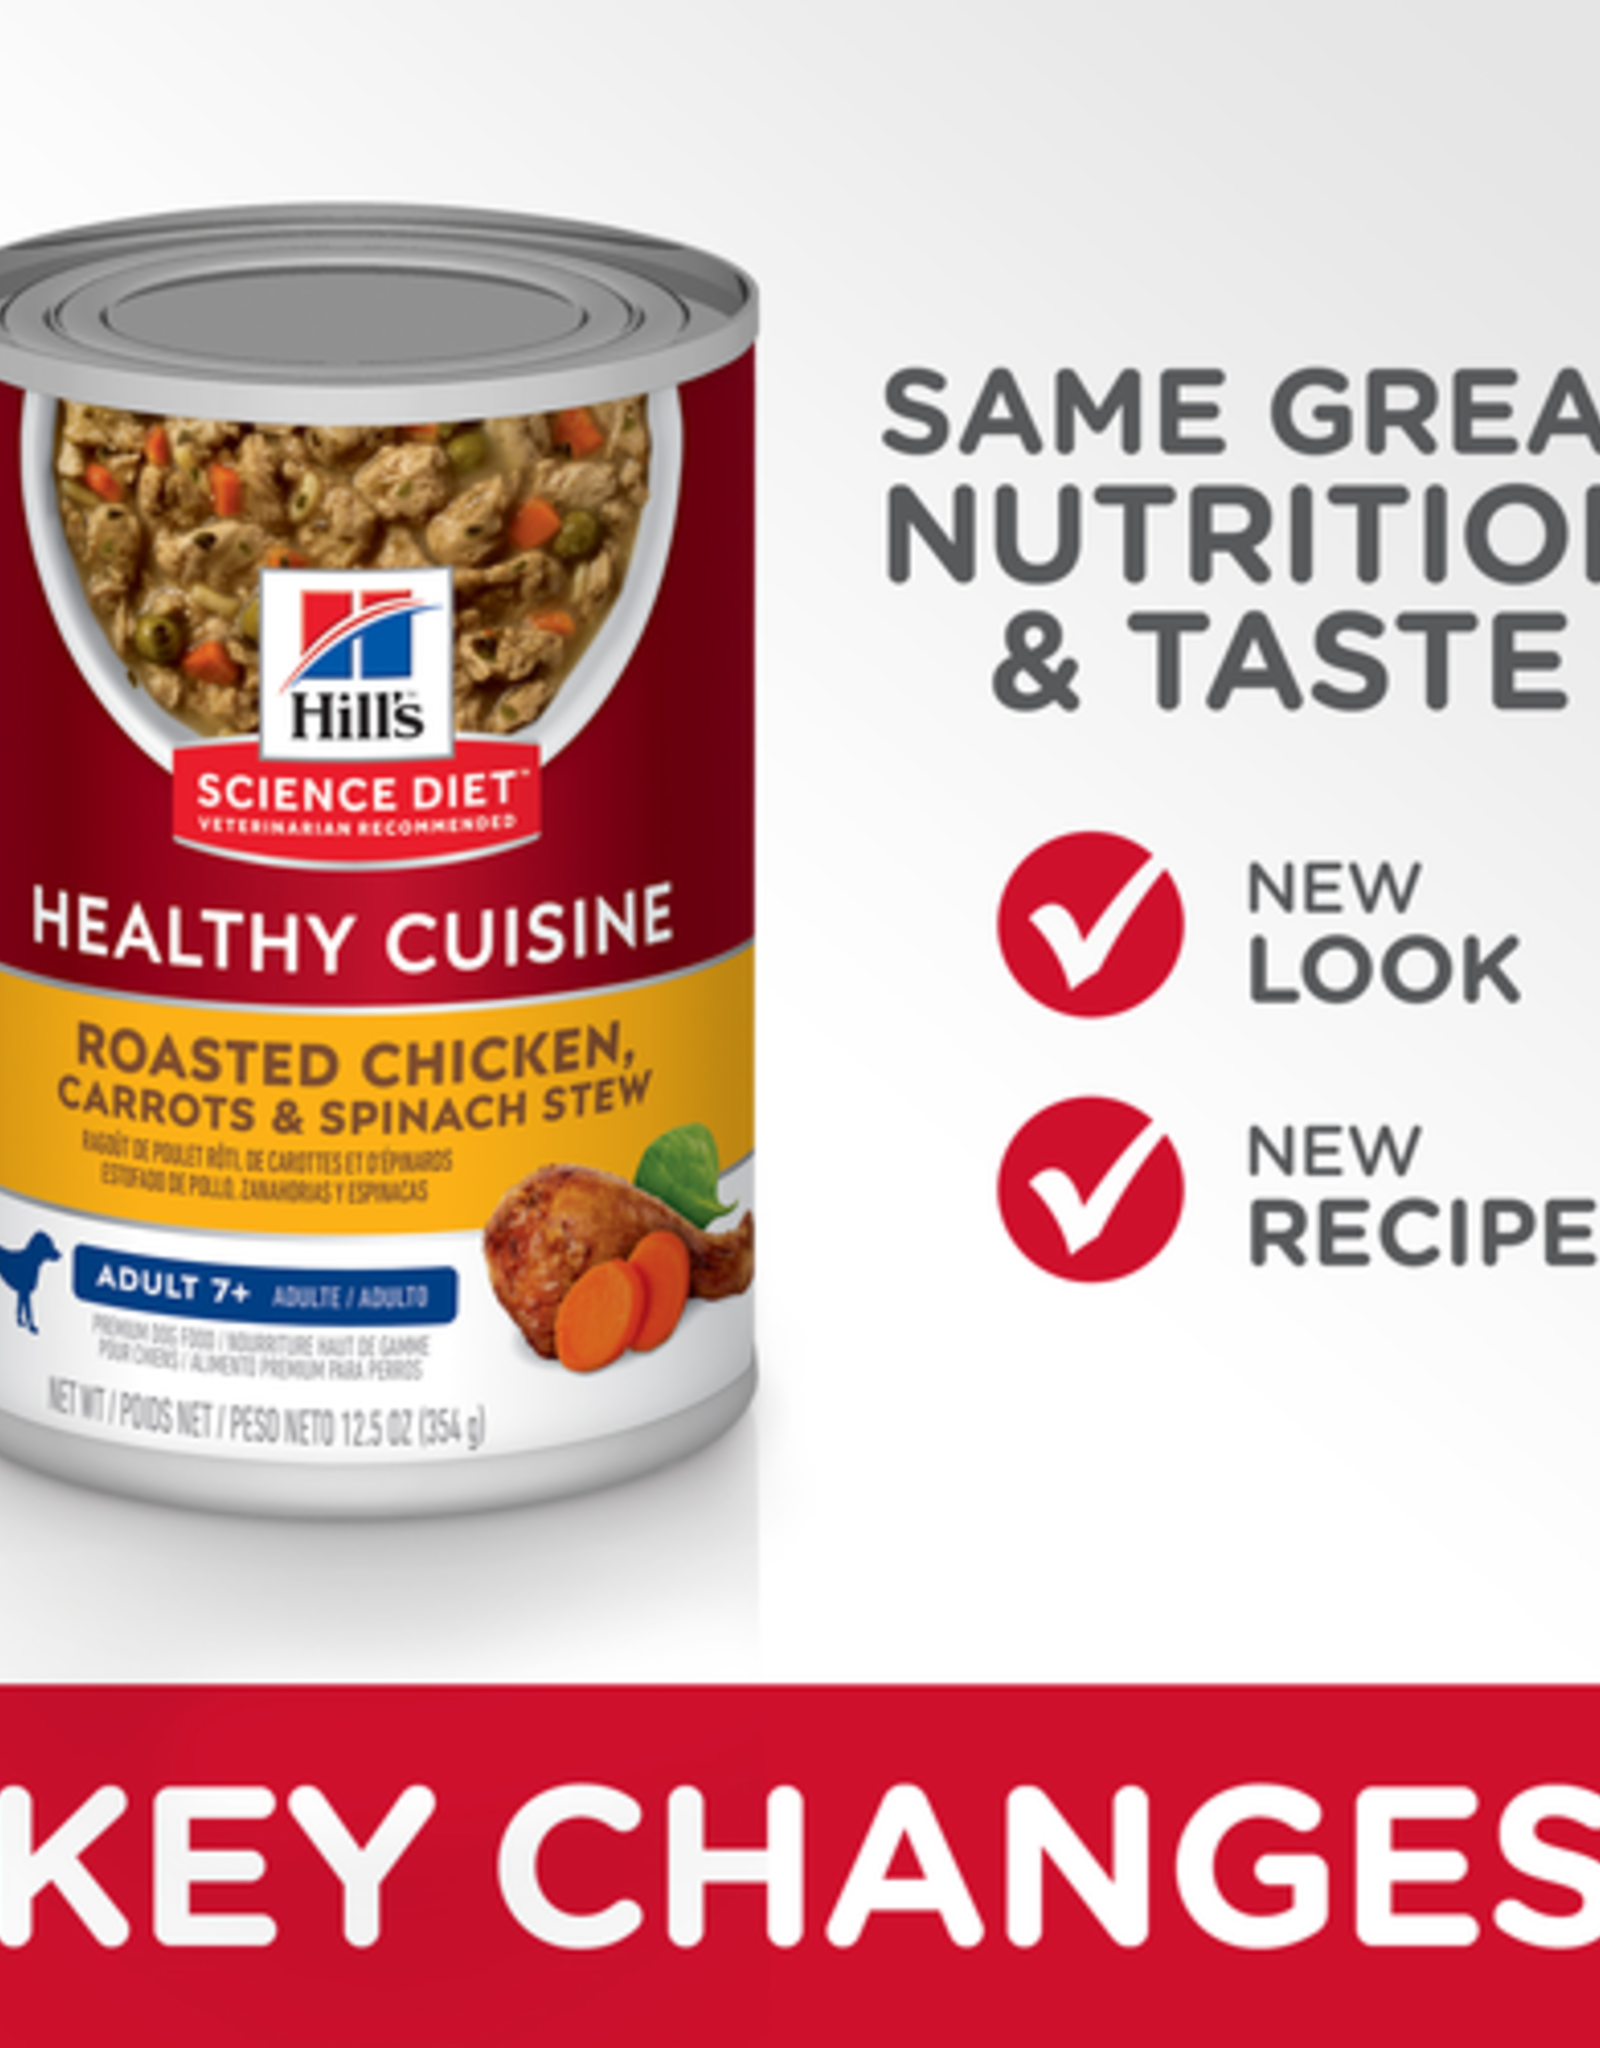 SCIENCE DIET HILL'S SCIENCE DIET DOG HEALTHY CUISINE ADULT 7+ CHICKEN CARROT & SPINACH STEW CAN 12.5OZ CASE OF 12